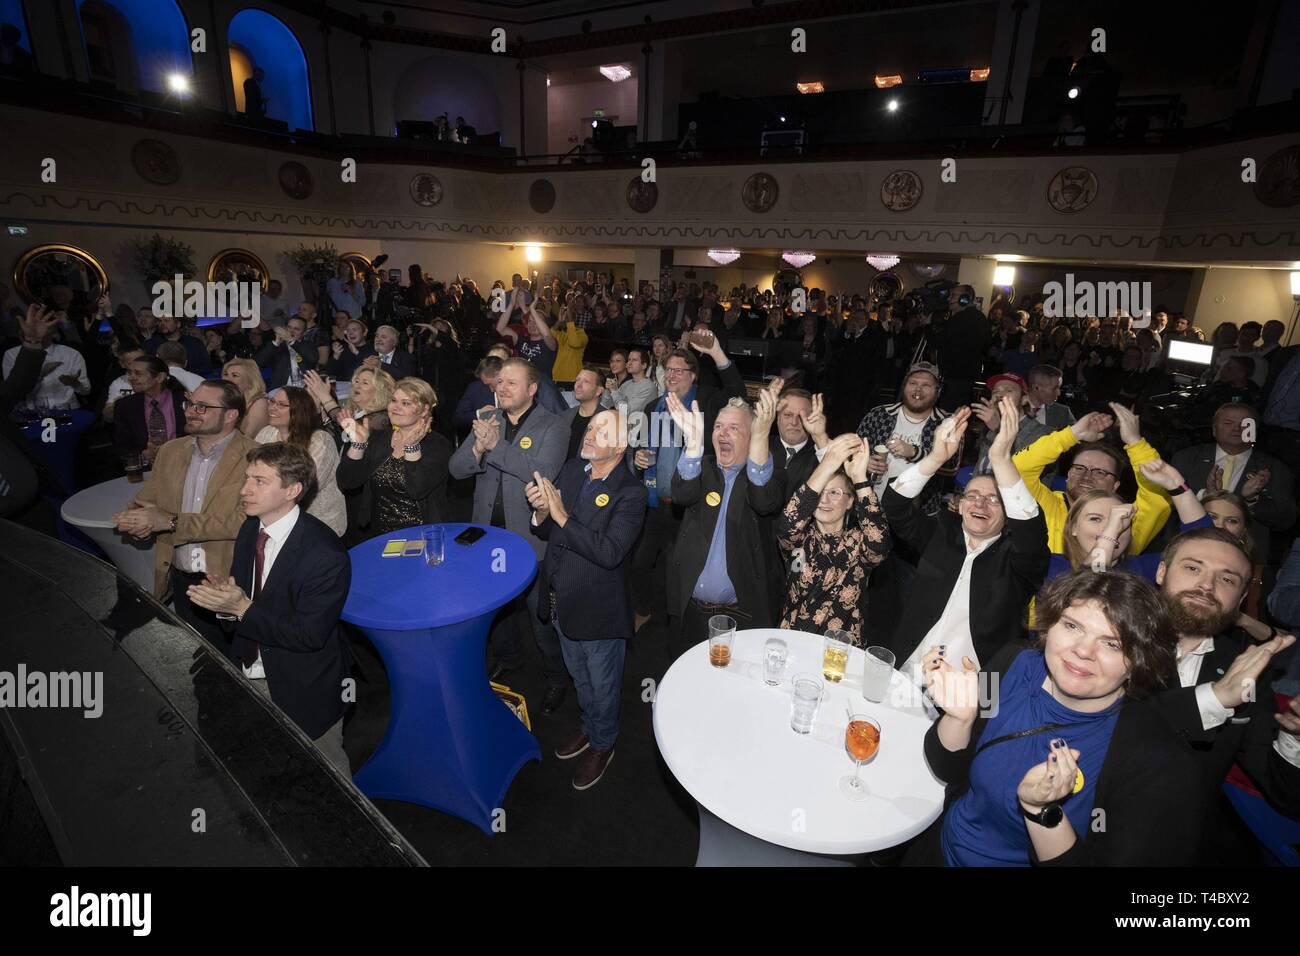 Helsinki, Finland. 14th Apr, 2019. Finns Party supporters celebrate during the party's election night event in Helsinki, Finland, April 14, 2019. Finland's opposition Social Democratic Party is to become the biggest in parliament with 40 seats, the national broadcaster Yle predicted late on Sunday. The prognosis said the Social Democrats would get 40 seats, the populist Finns Party would have 39 seats, and the conservative National Coalition Party, 38. Credit: Matti Matikainen/Xinhua/Alamy Live News Stock Photo